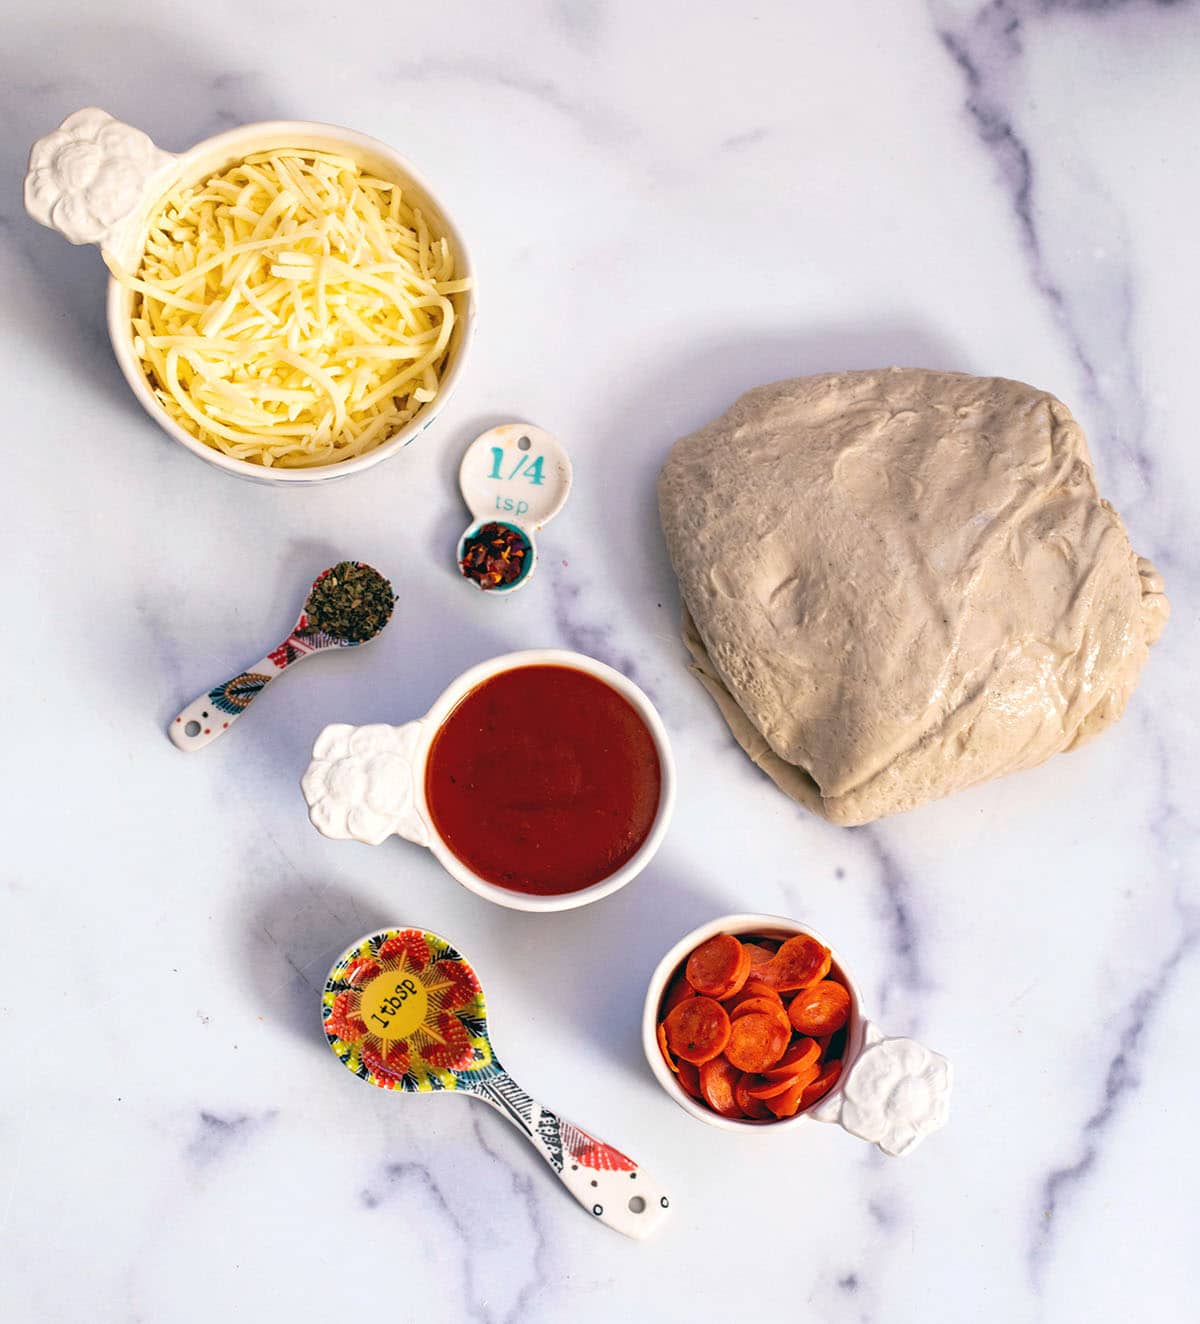 Overhead view of ingredients needed for pizza cupcakes, including: pizza dough, shredded cheese, pizza sauce, mini pepperoni, olive oil, dried basil, and red pepper flakes.